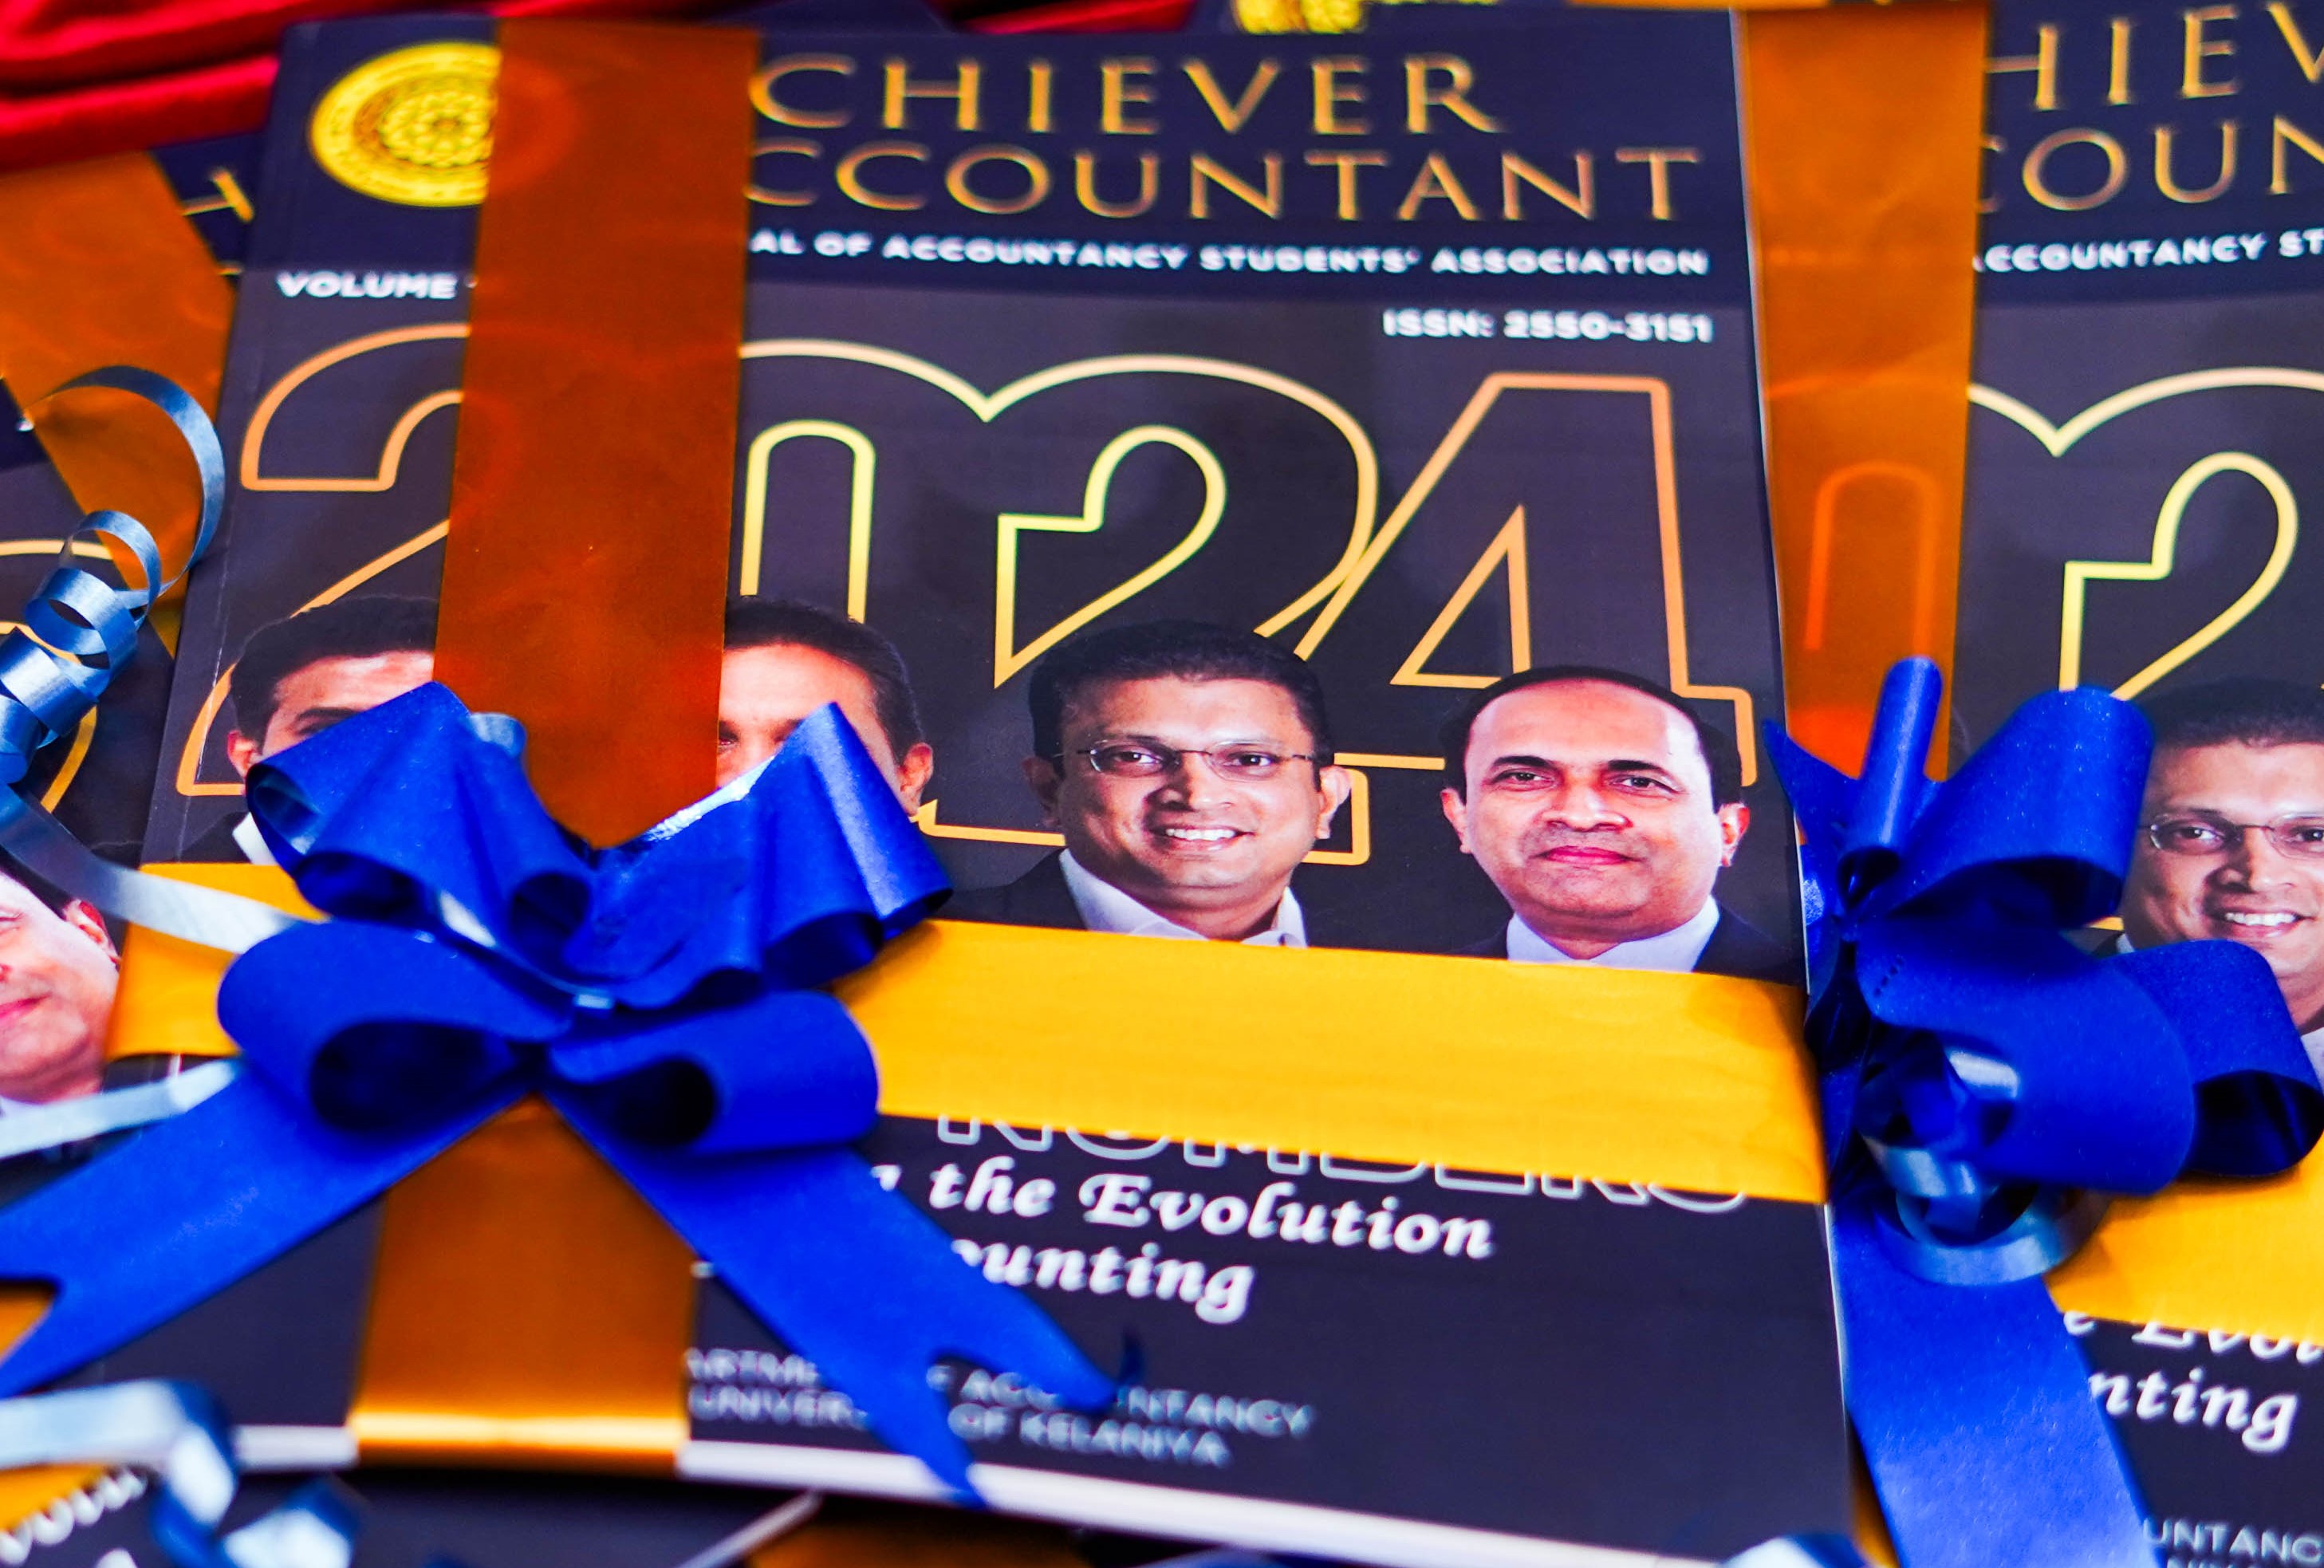 ‘Achiever Accountant Journal': A Treasure Trove of Accounting Knowledge has been Launched